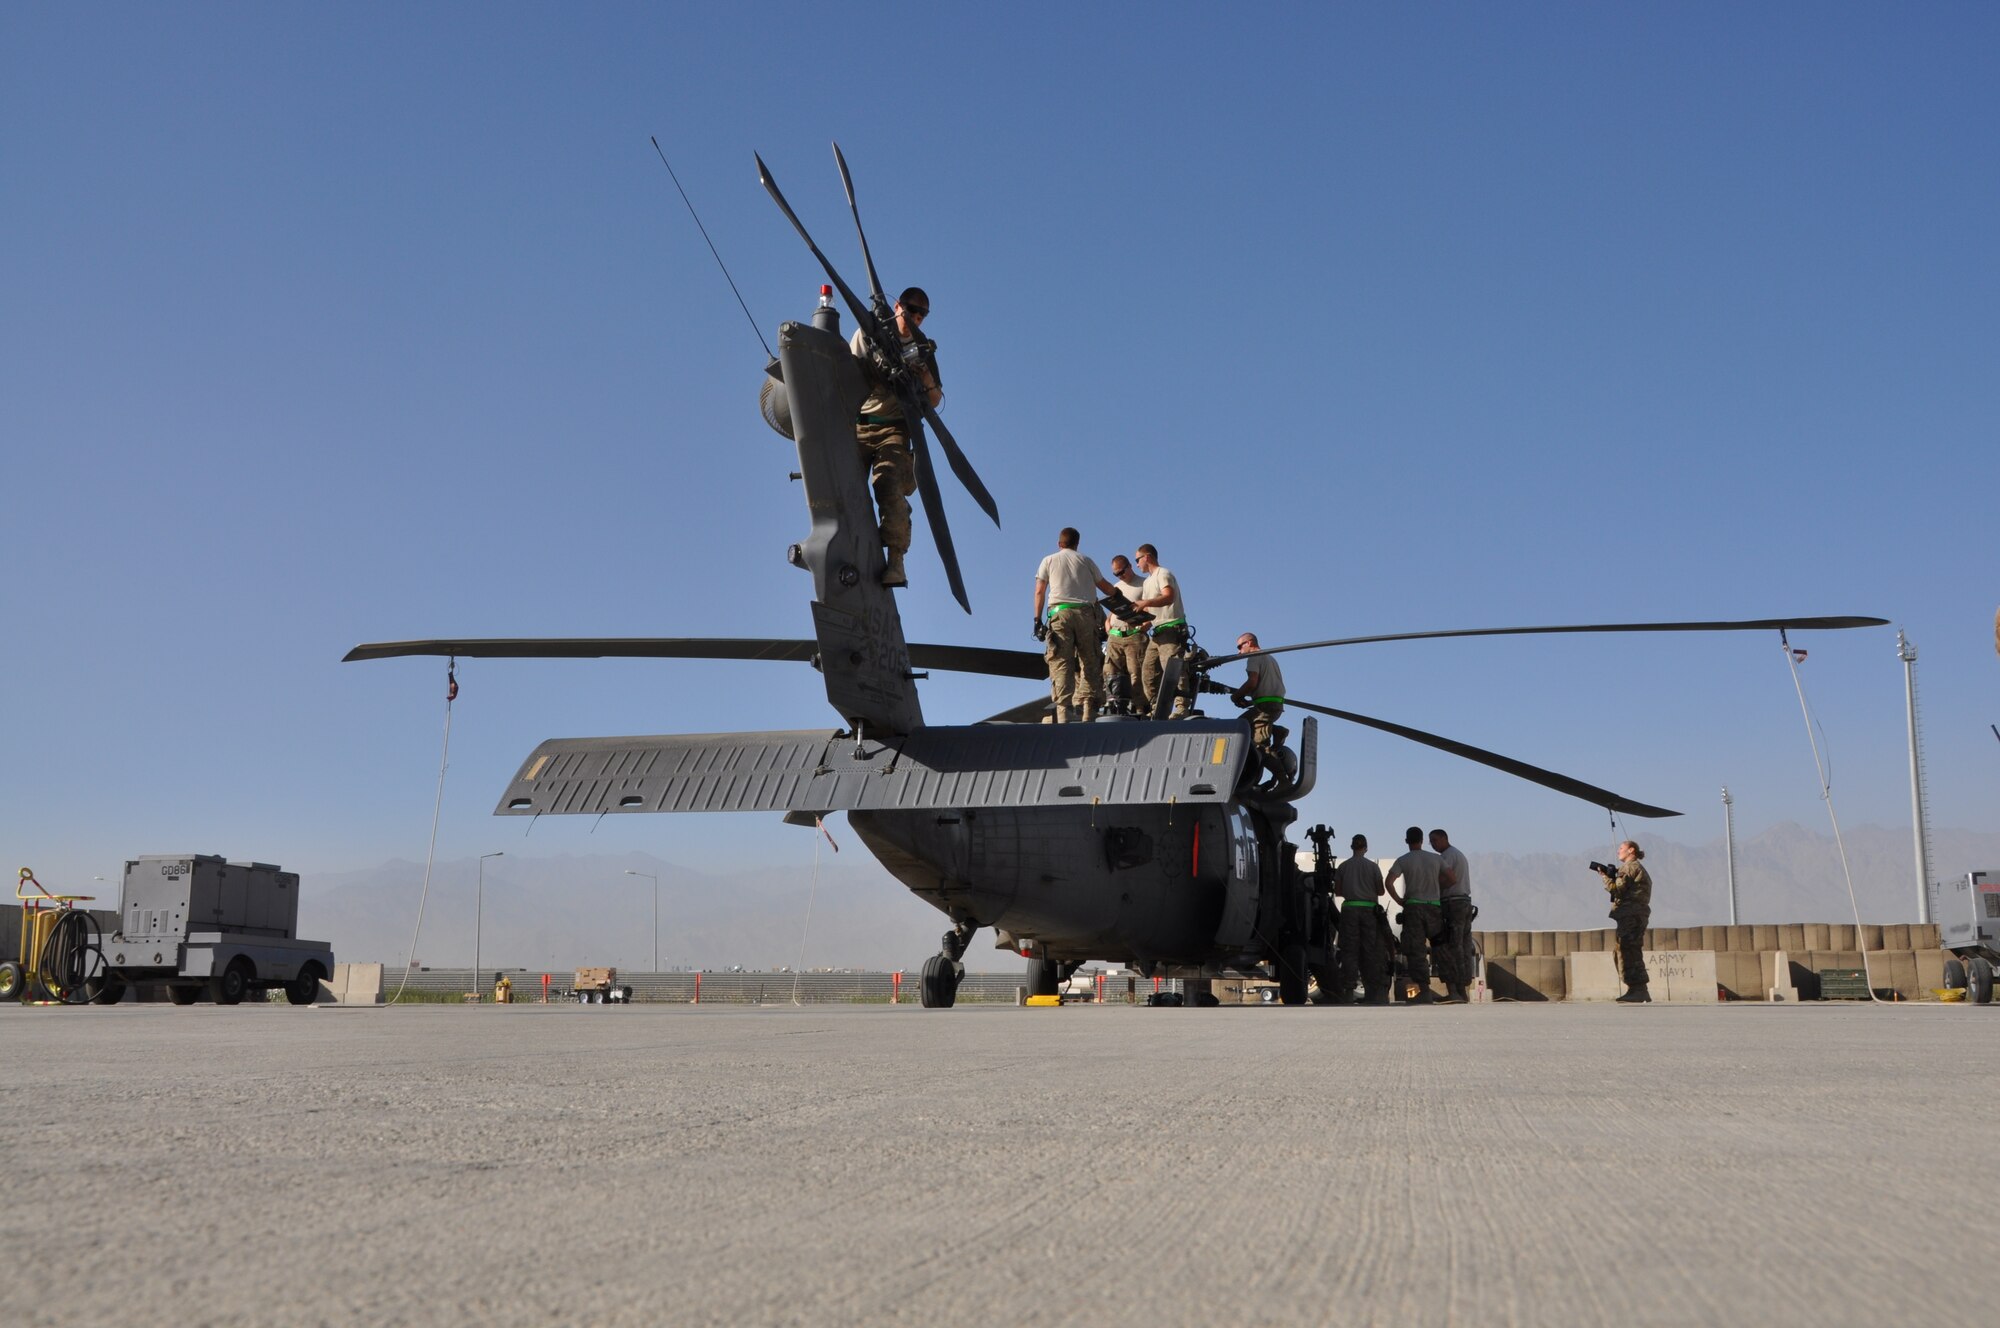 Service members from the 455th Expeditionary Maintenance Squadron conduct a 50-hour preventative maintenance inspection on aircraft 89-6205, an HH-60G Pave Hawk helicopter assigned to the 56th Expeditionary Helicopter Maintenance Unit at Bagram Airfield, Afghanistan, July 24, 2013. The Airmen, are deployed from the 748th Aircraft Maintenance Squadron at Royal Air Force Lakenheath, England. (U.S. Air Force photo/Tech. Sgt. Rob Hazelett)